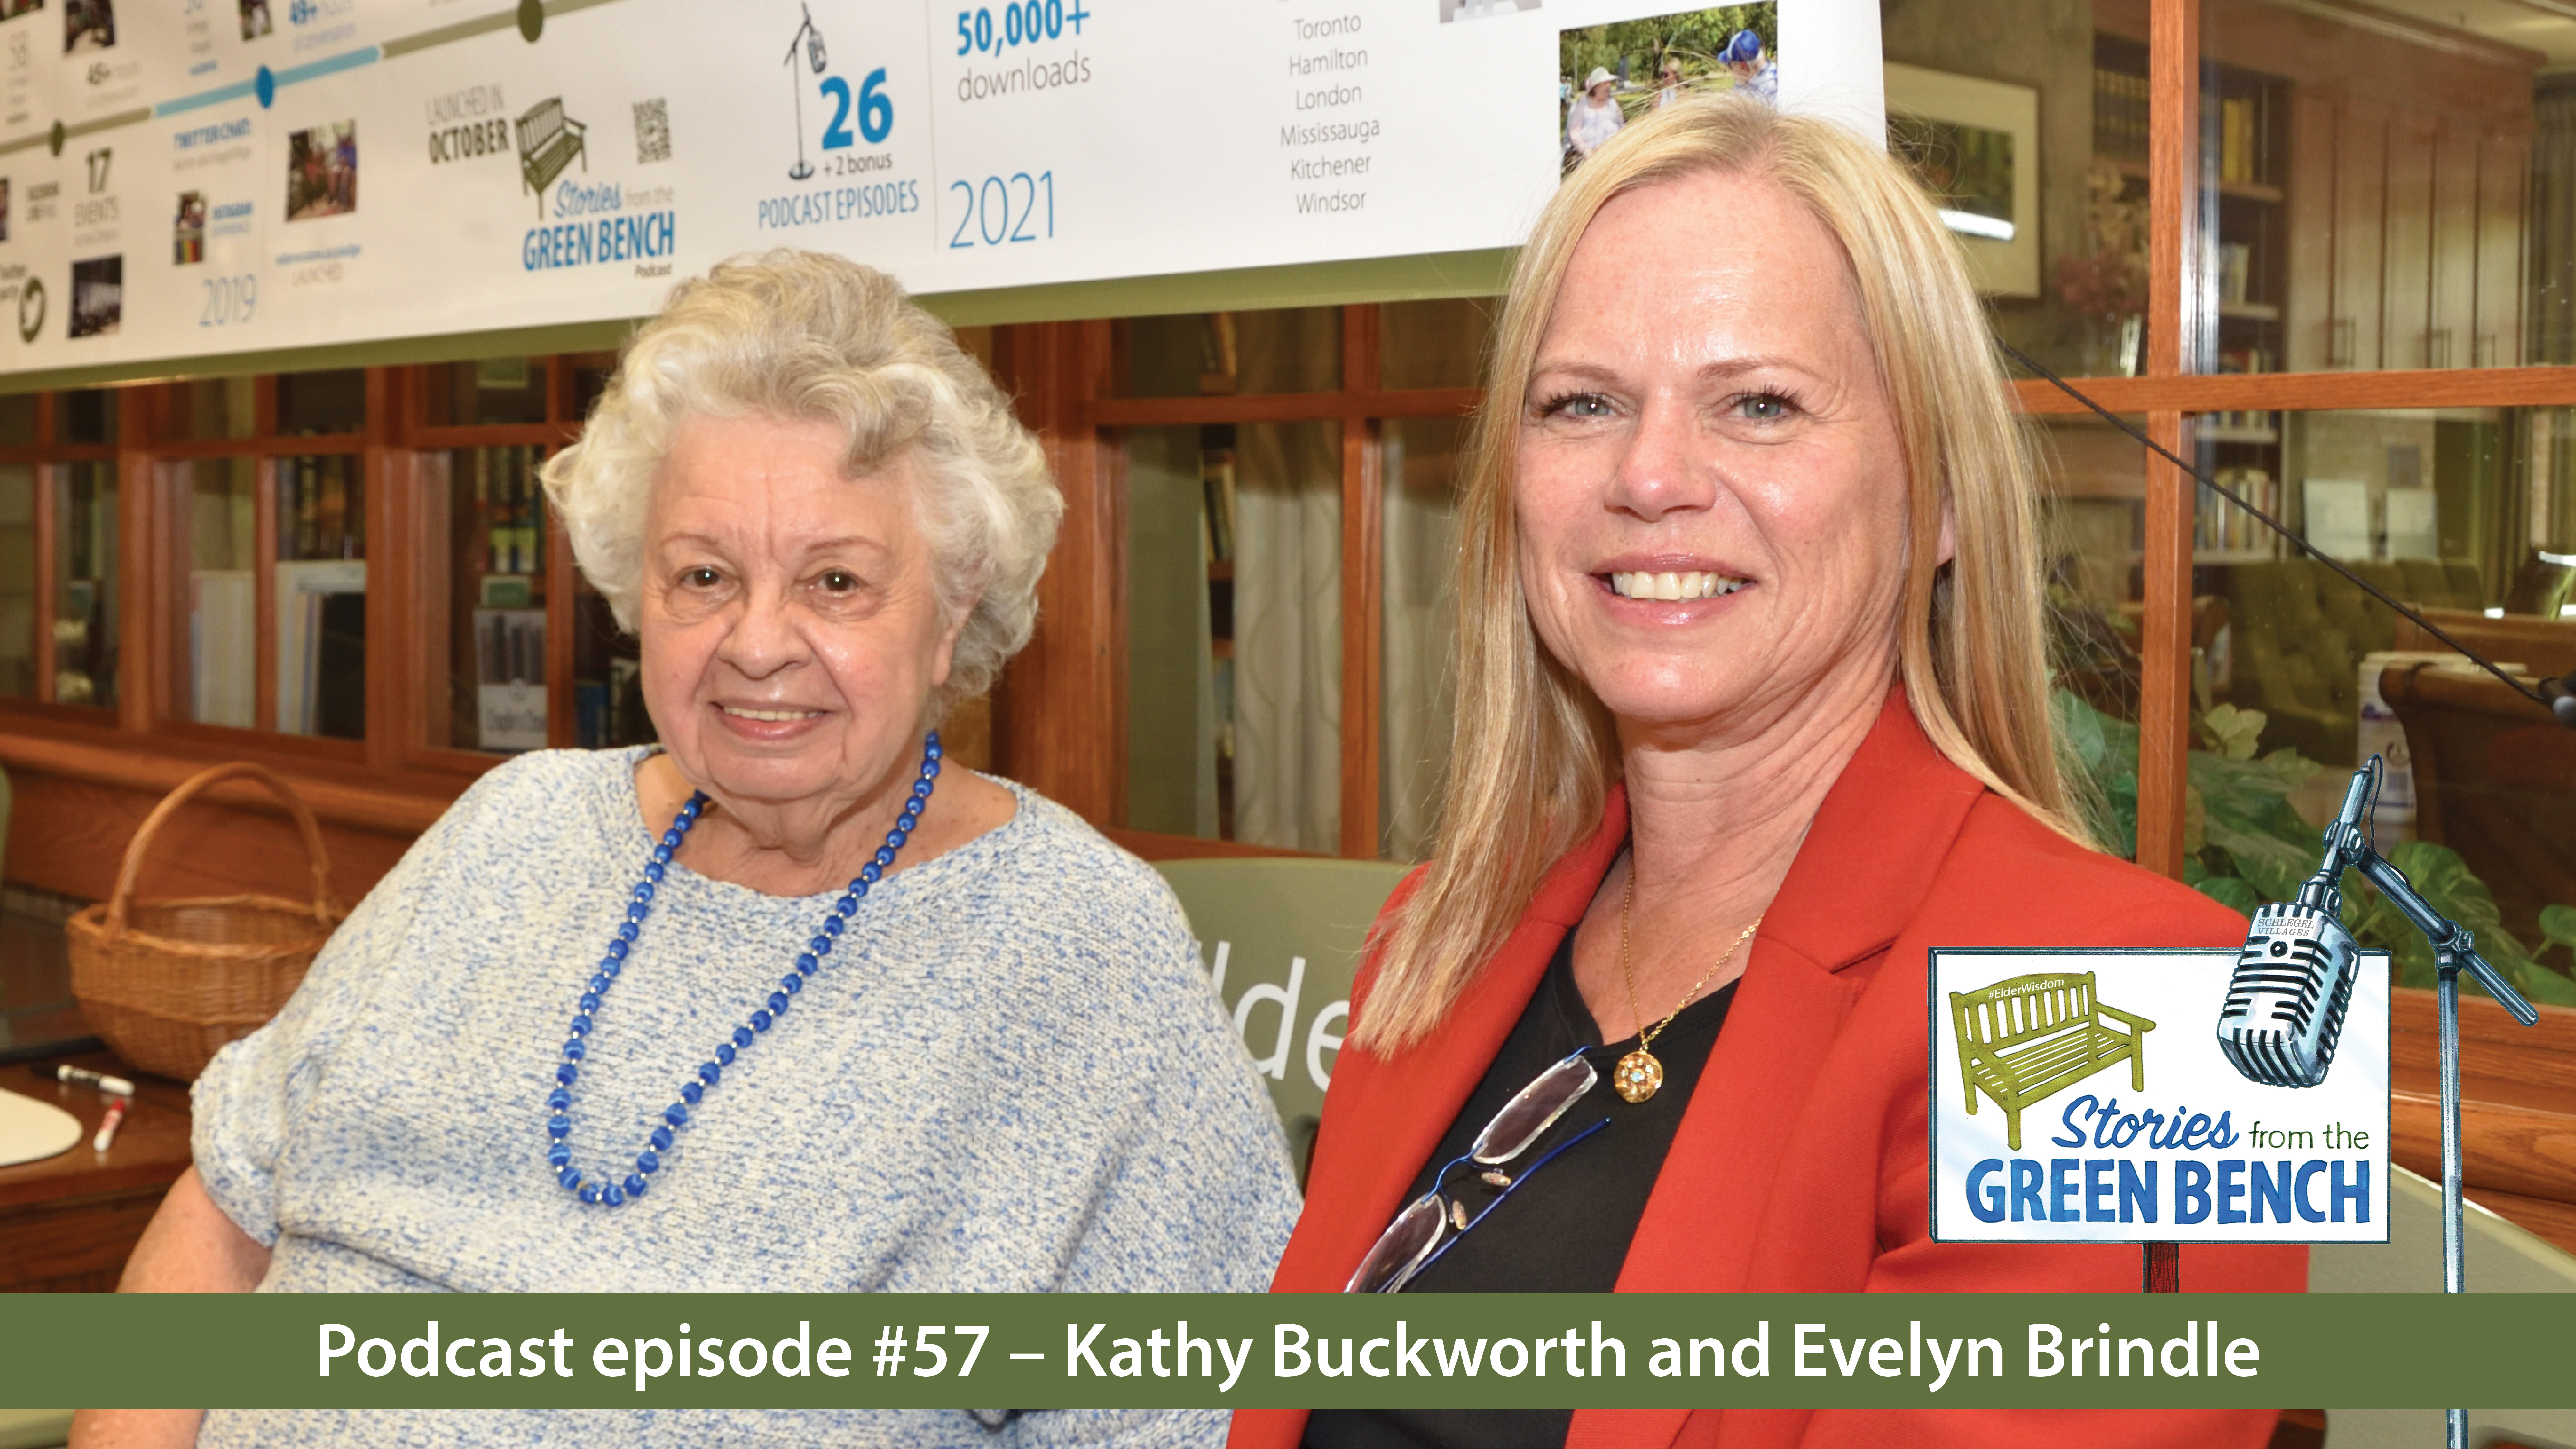 Hosts Kathy & Evelyn sitting on the green bench to promote episode 57 of the #ElderWisdom podcast